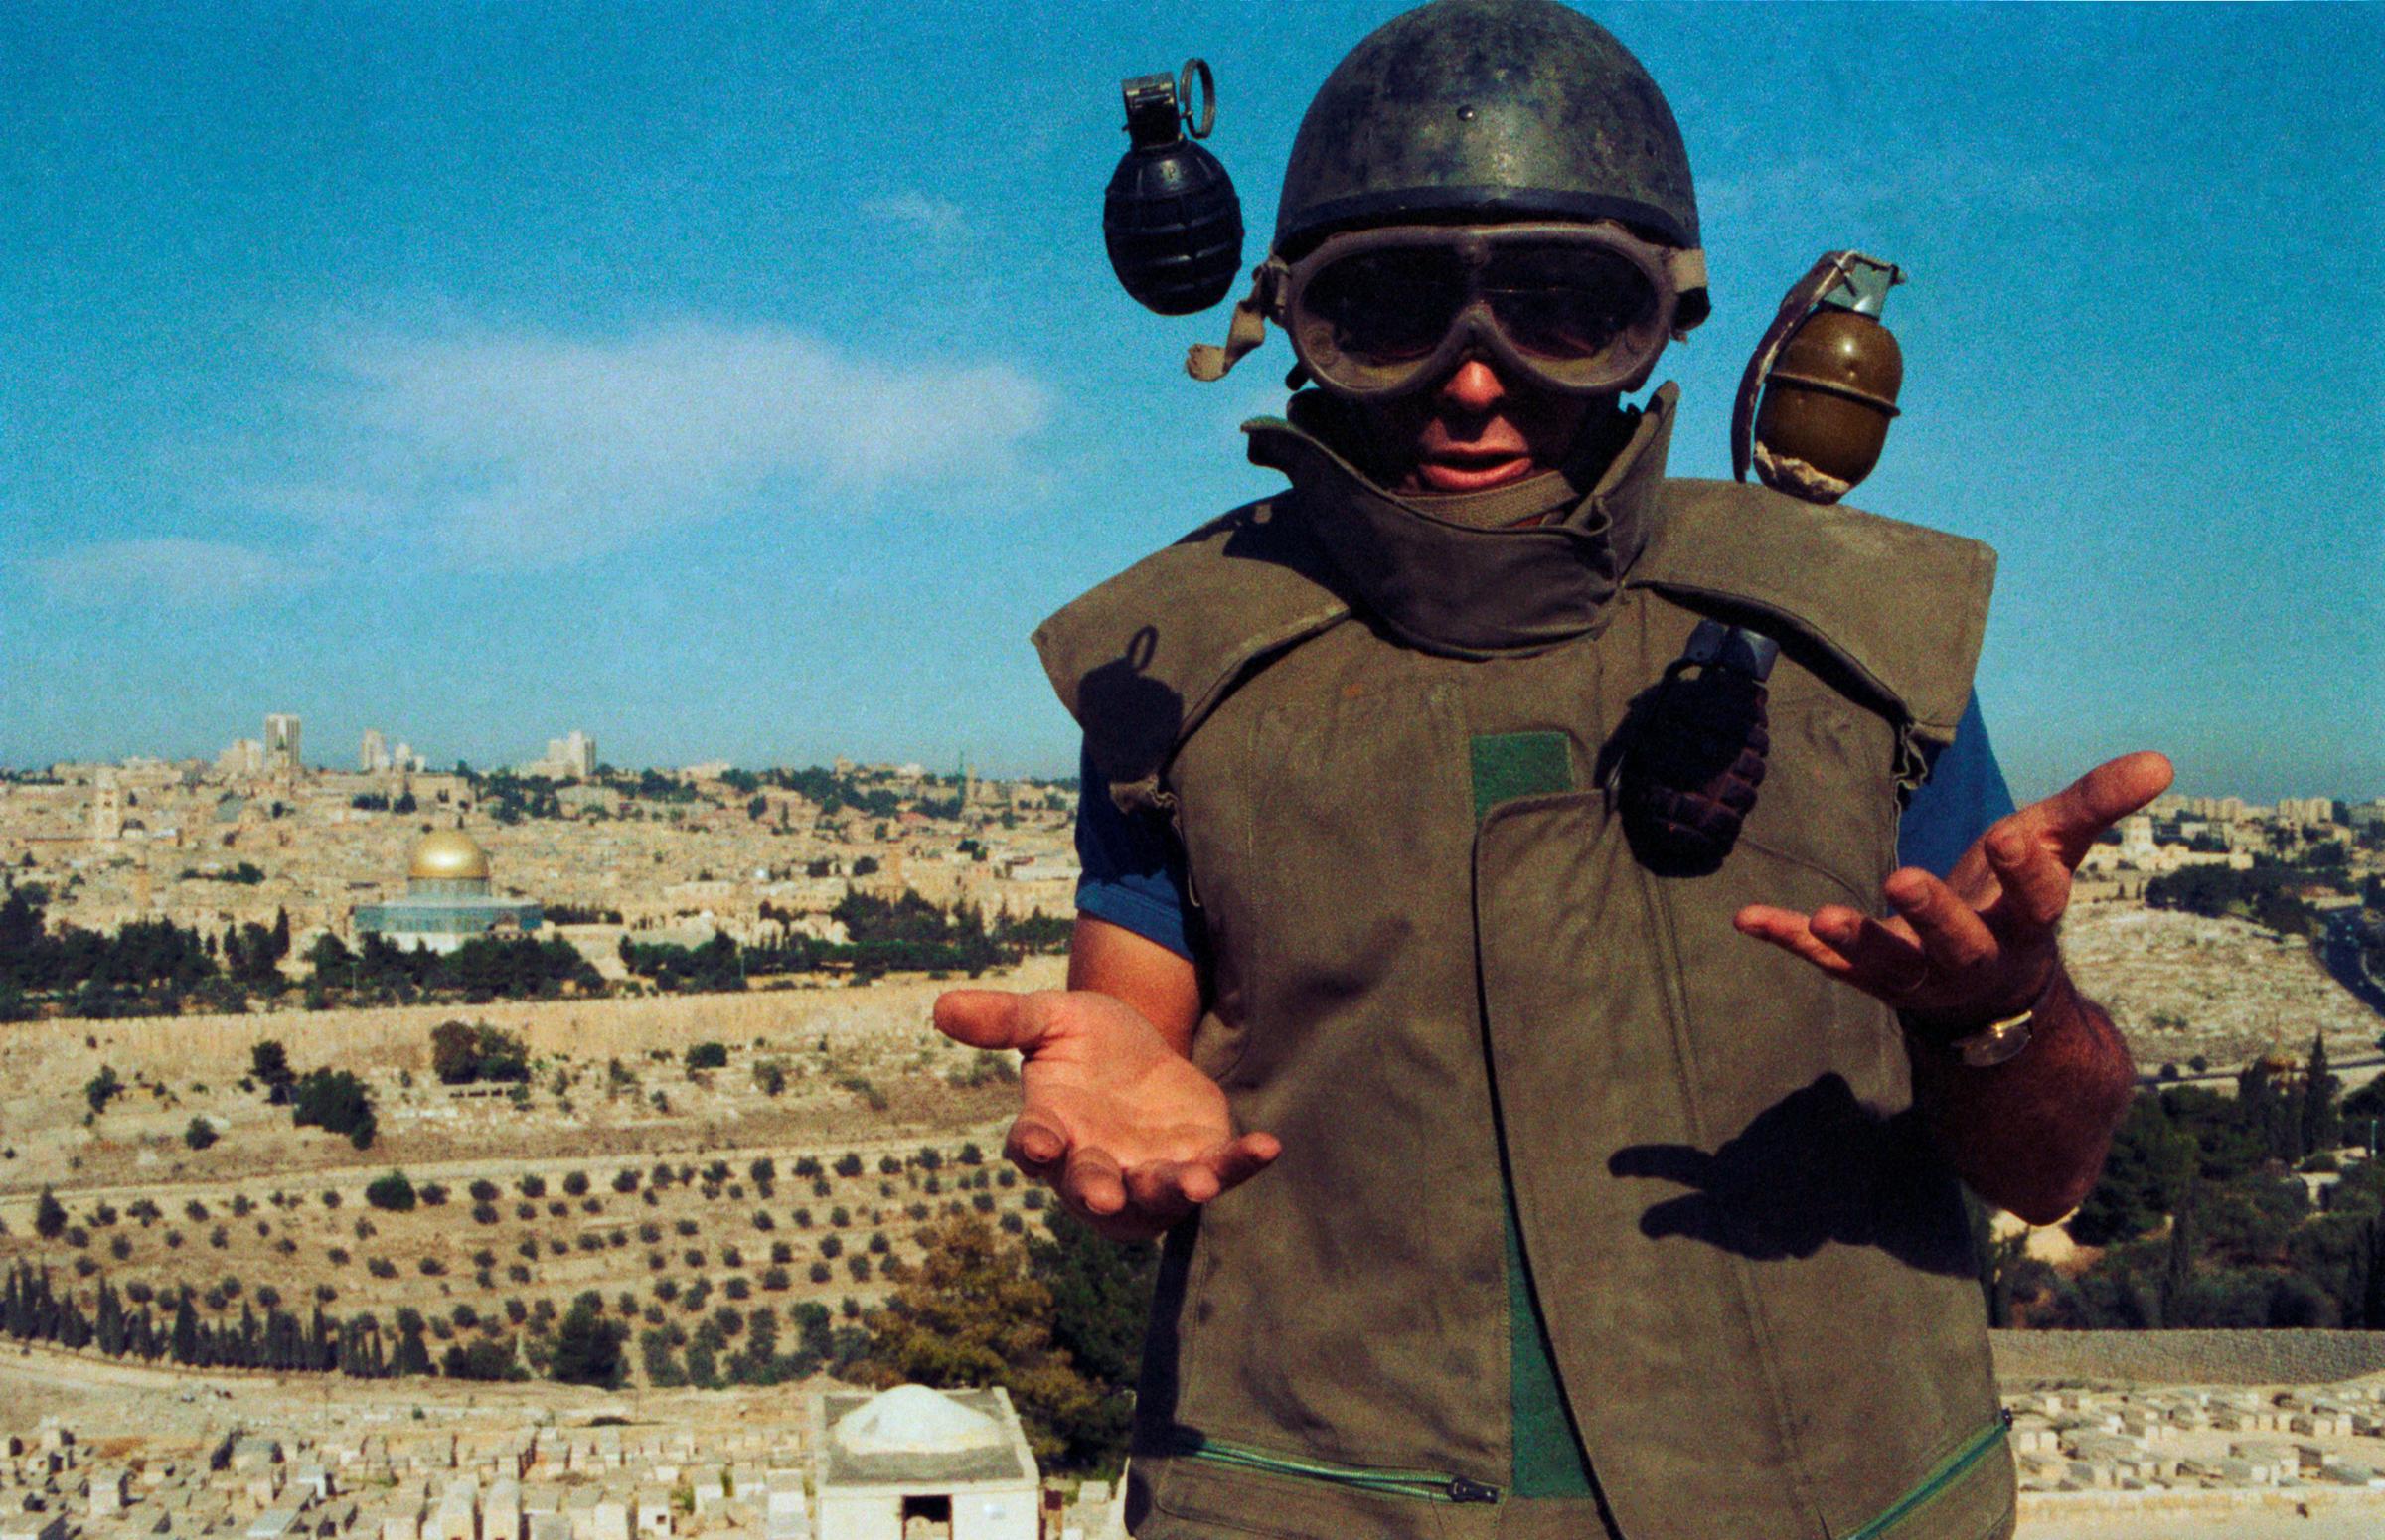 Dressed in bomb-squad protective gear, Uri tries to learn how to juggle using three hand grenades on a hill above the holy city. A year ago a terrorist-planted bomb exploded in a bus carrying Jews through West Jerusalem. “I arrived two minutes after the explosion,” says Uri. “There were shoes, fingers, glasses, blood. It was hell.” During the last 12 months the team has defused 36 other such devices. [1984]